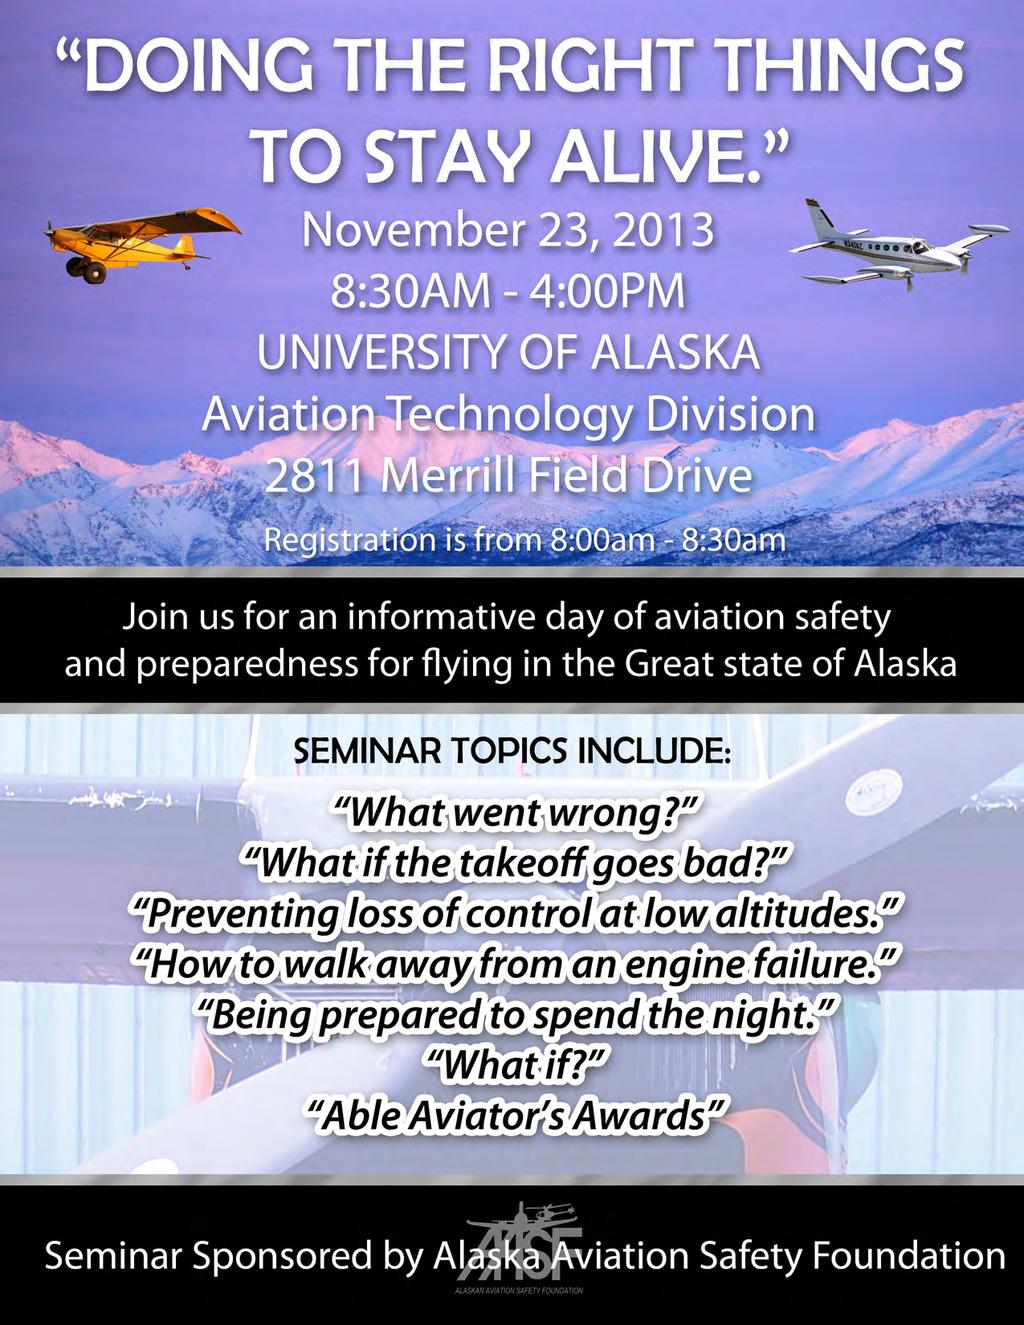 December 2013 Flypaper Page 3 The Alaska Chapter will have a table at the seminar.